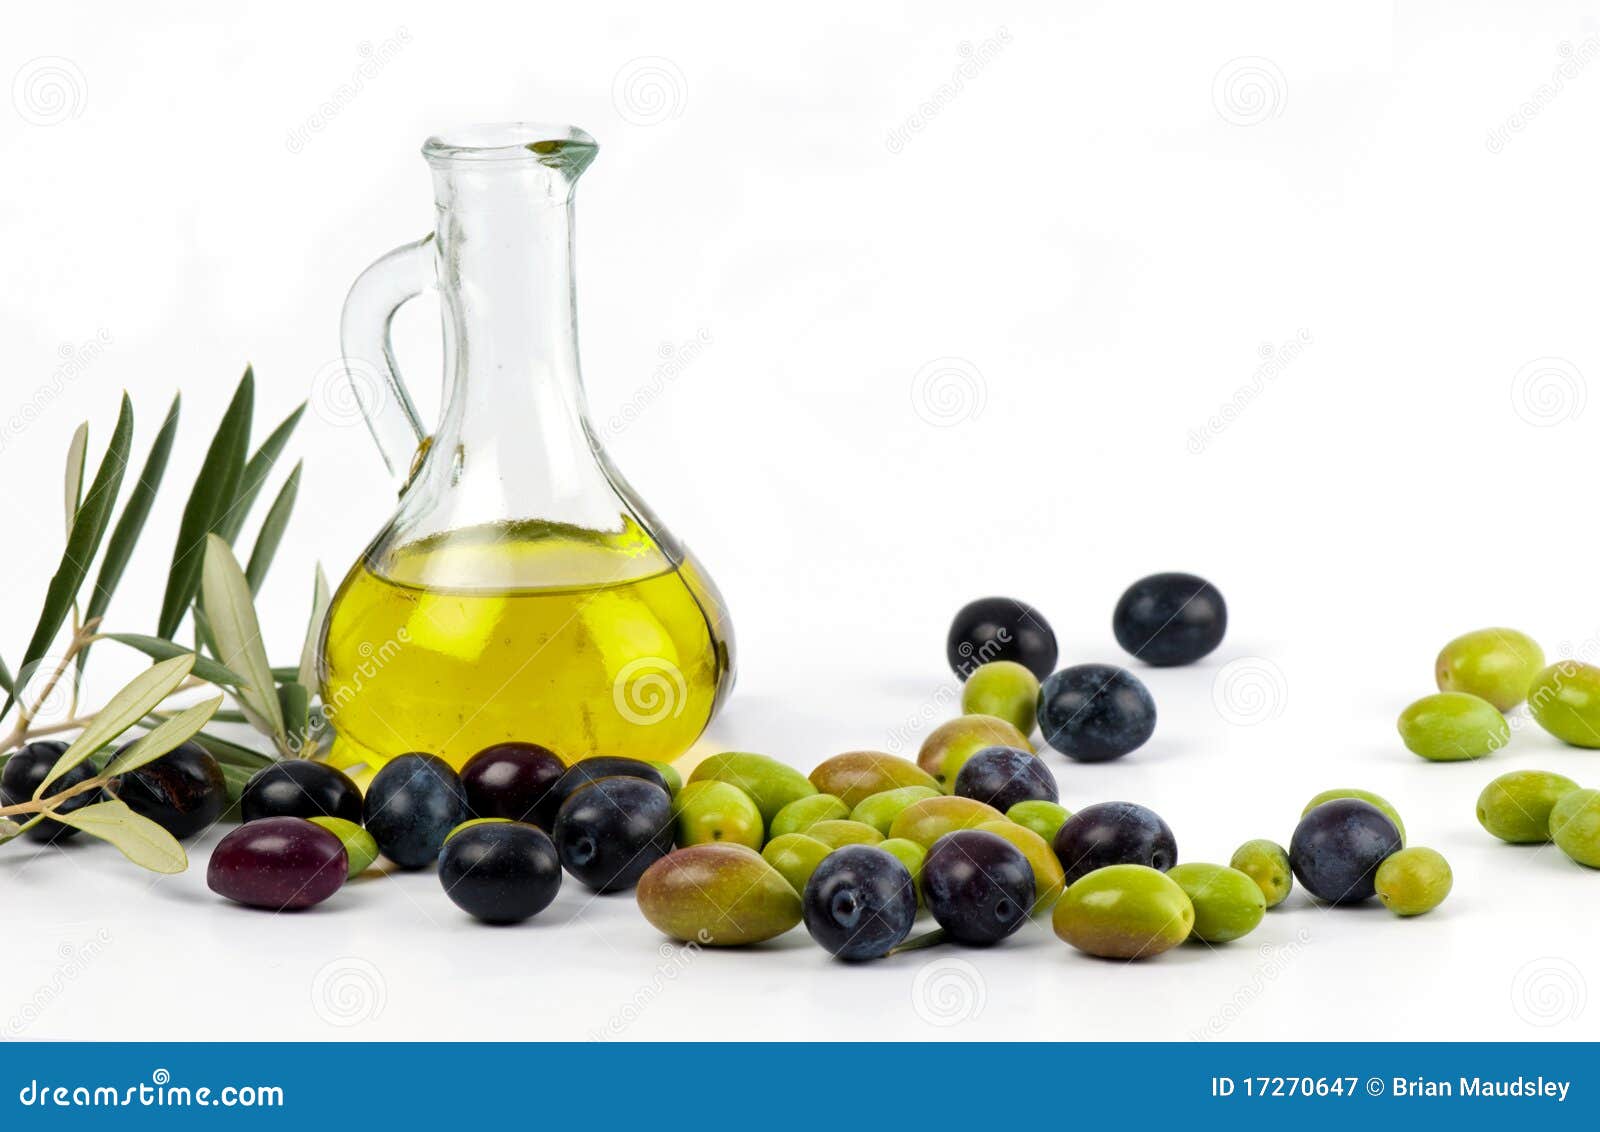 extra virgin olive oil with fresh olives.